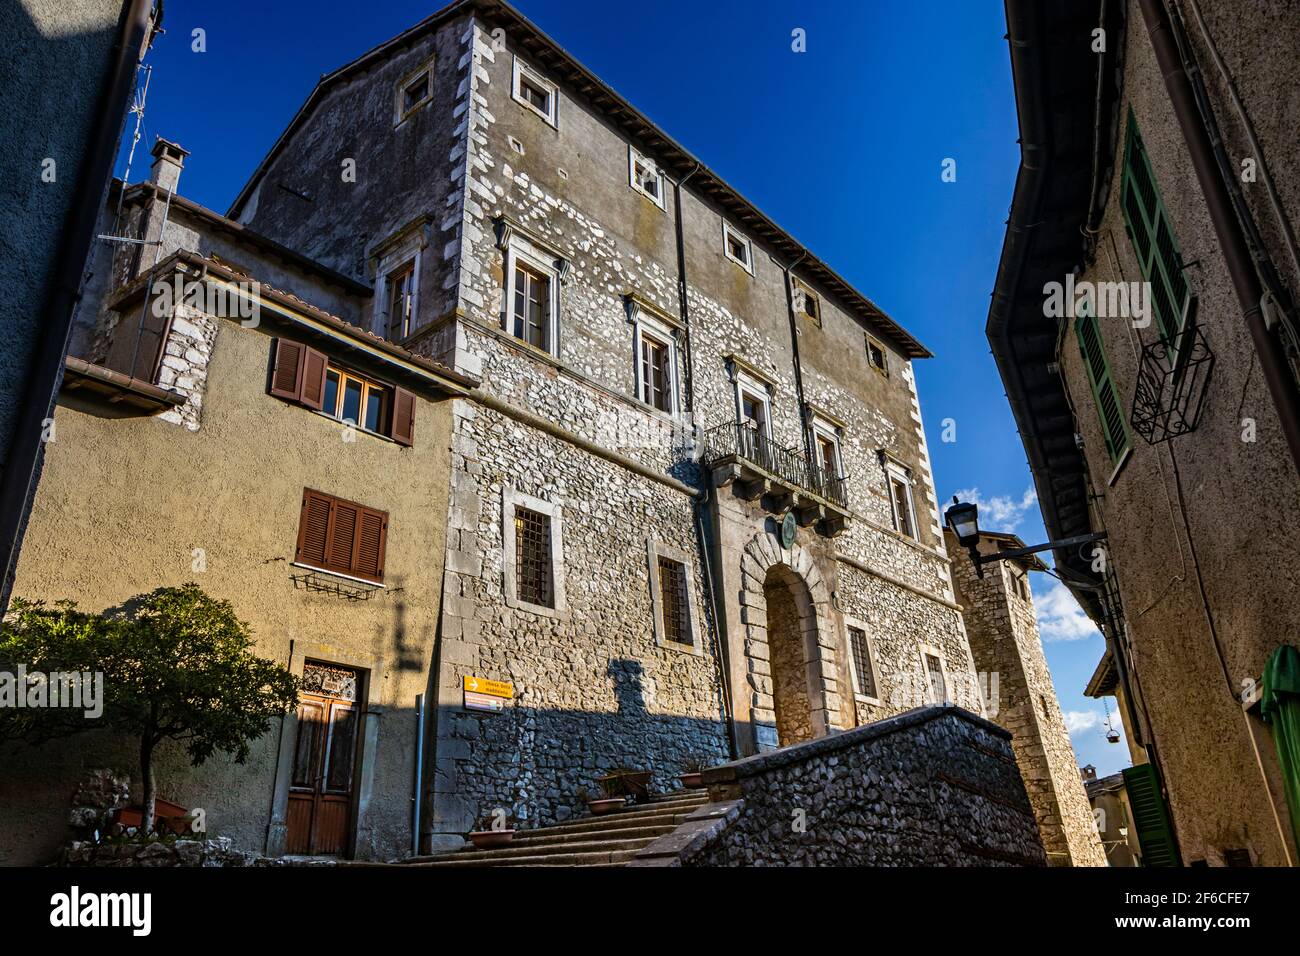 The small medieval village of Capranica Prenestina in Lazio, province of Rome. The imposing Palazzo Barberini, with the staircase and the large arched Stock Photo